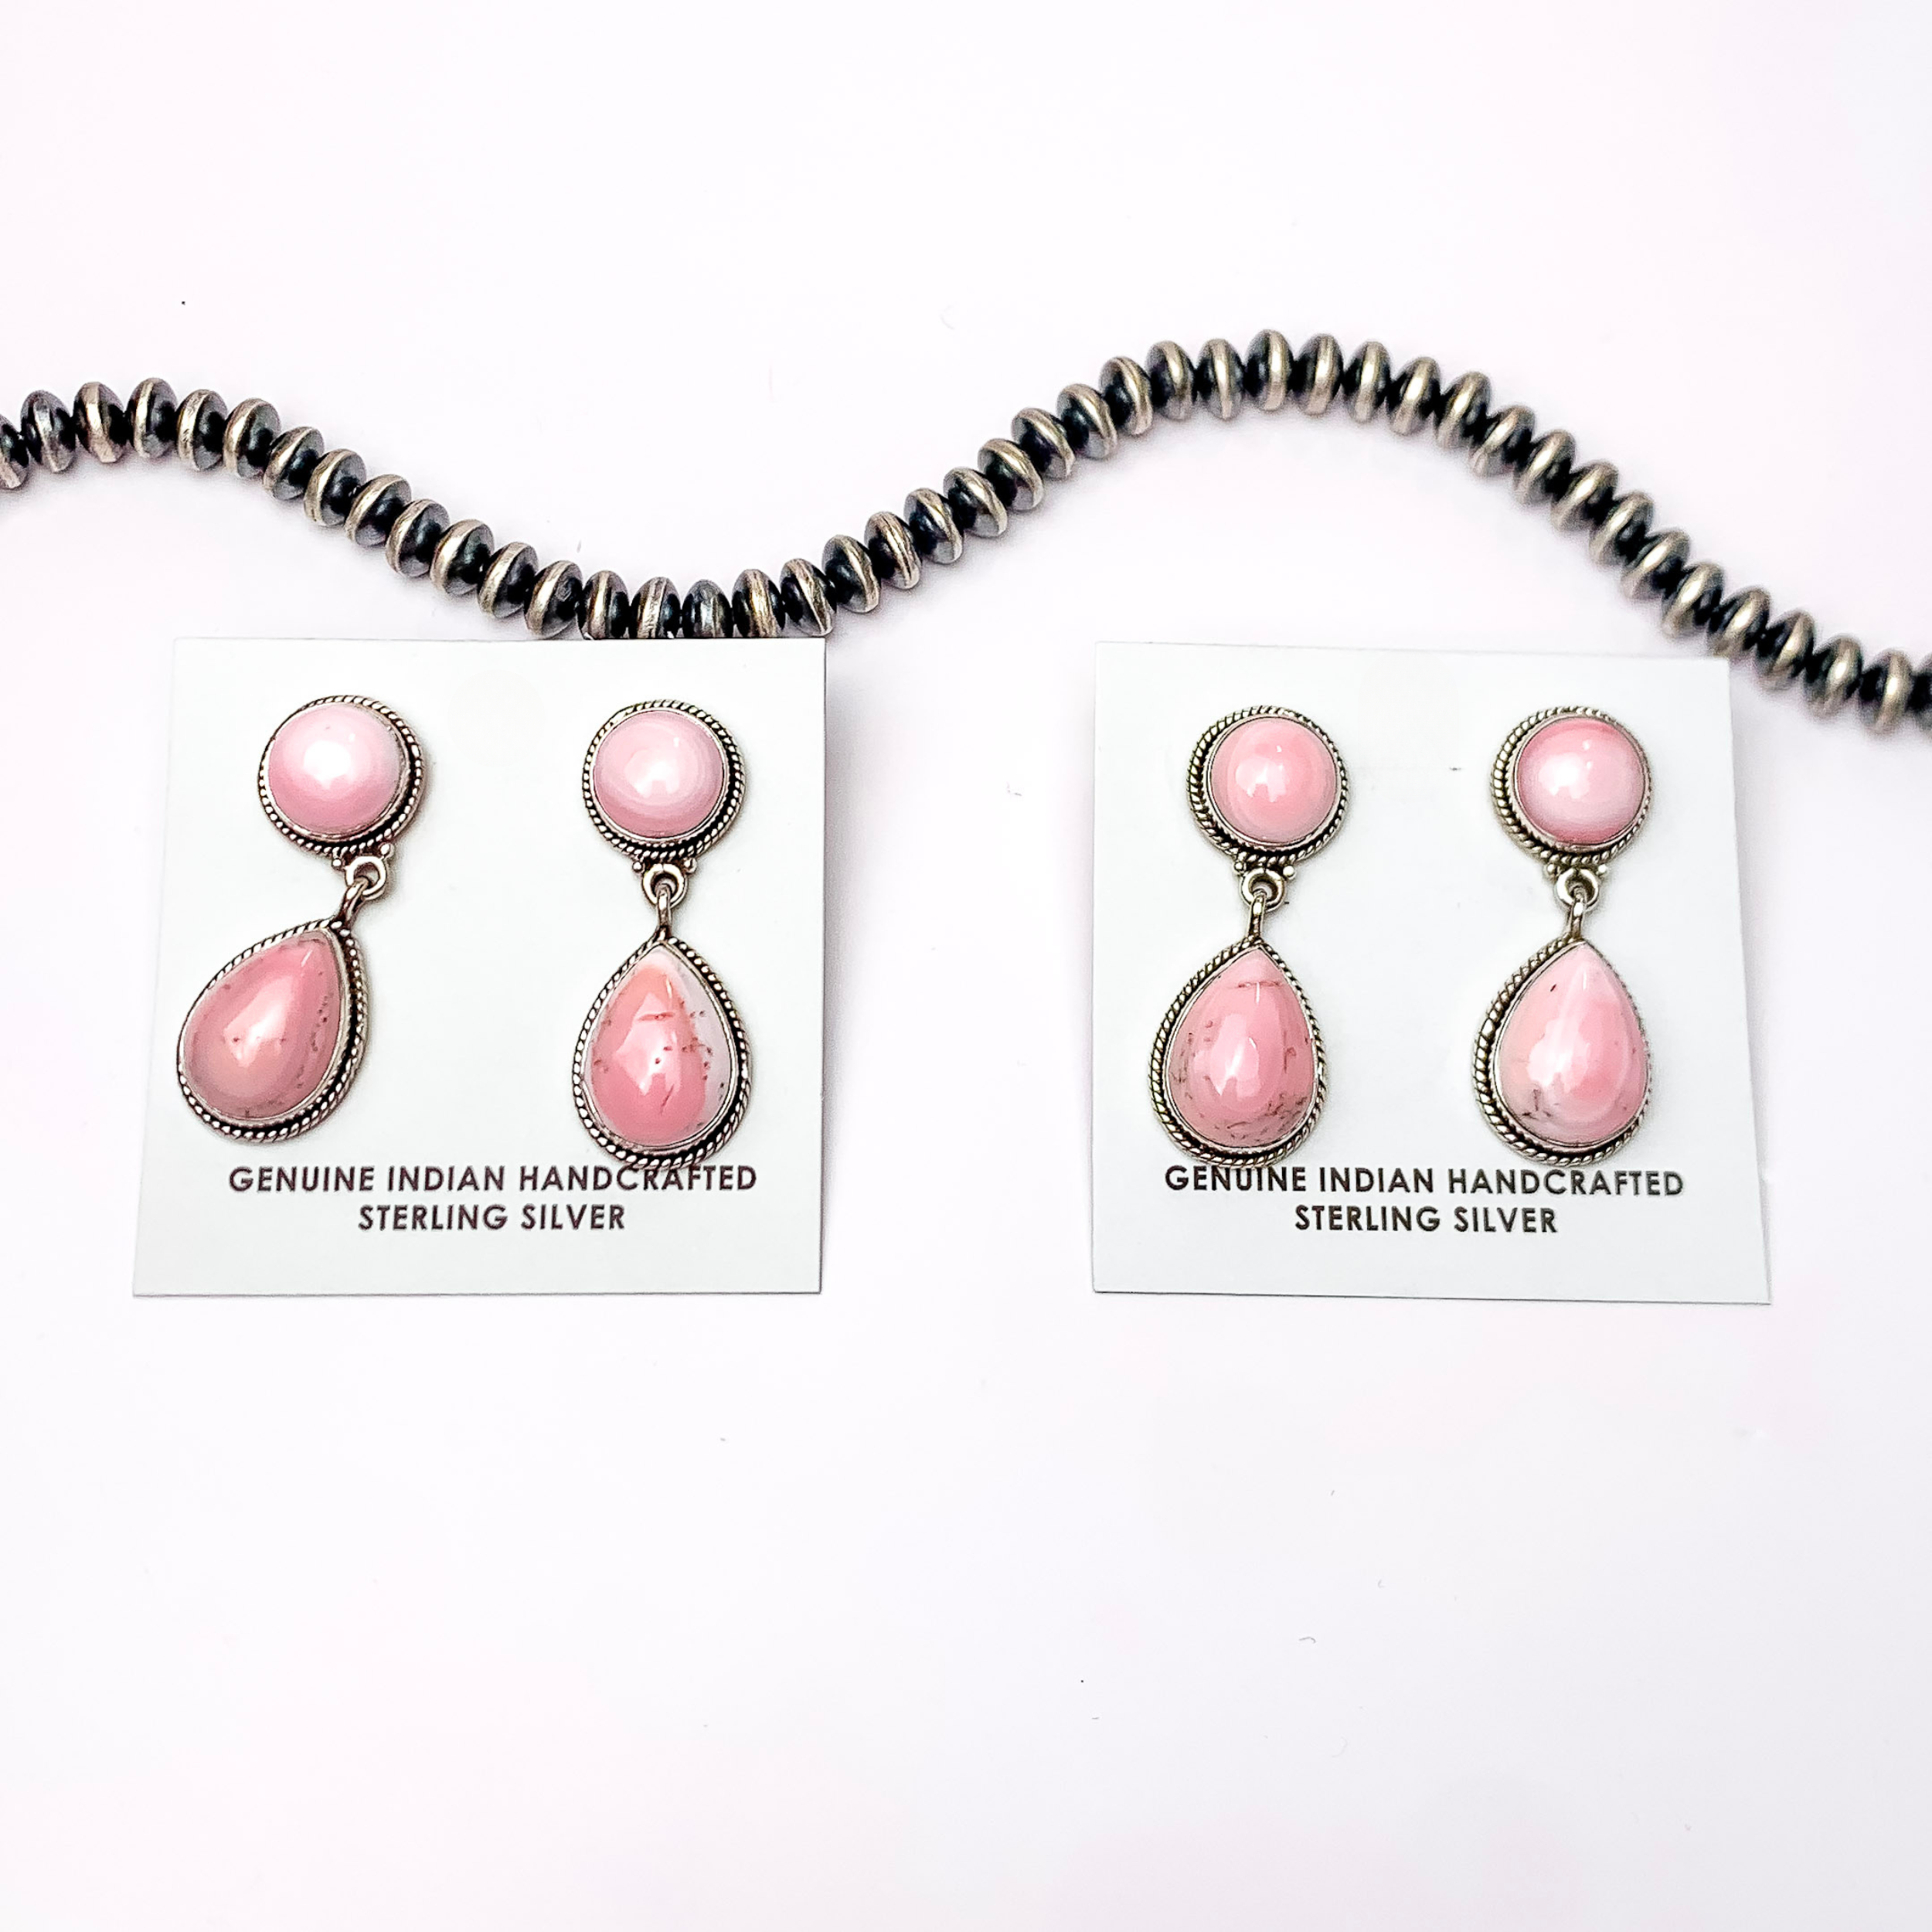 In the picture are Navajo pink conch teardrop earrings with a white background.